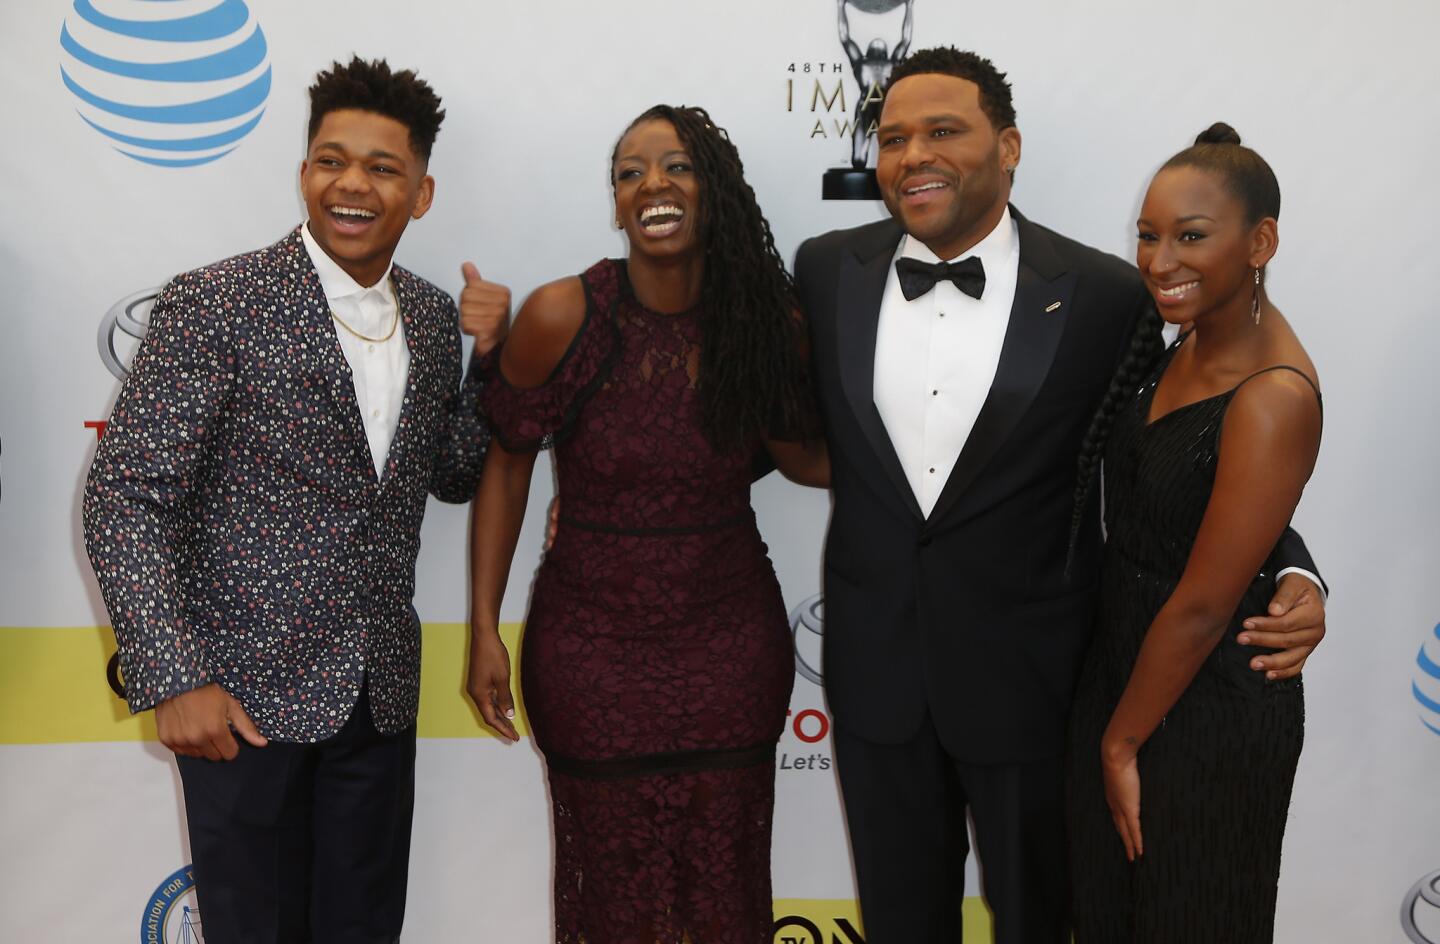 Host Anthony Anderson, second from right, wife Alvina Stewart and children Kyra Anderson and Nathan Anderson at the NAACP Image Awards.